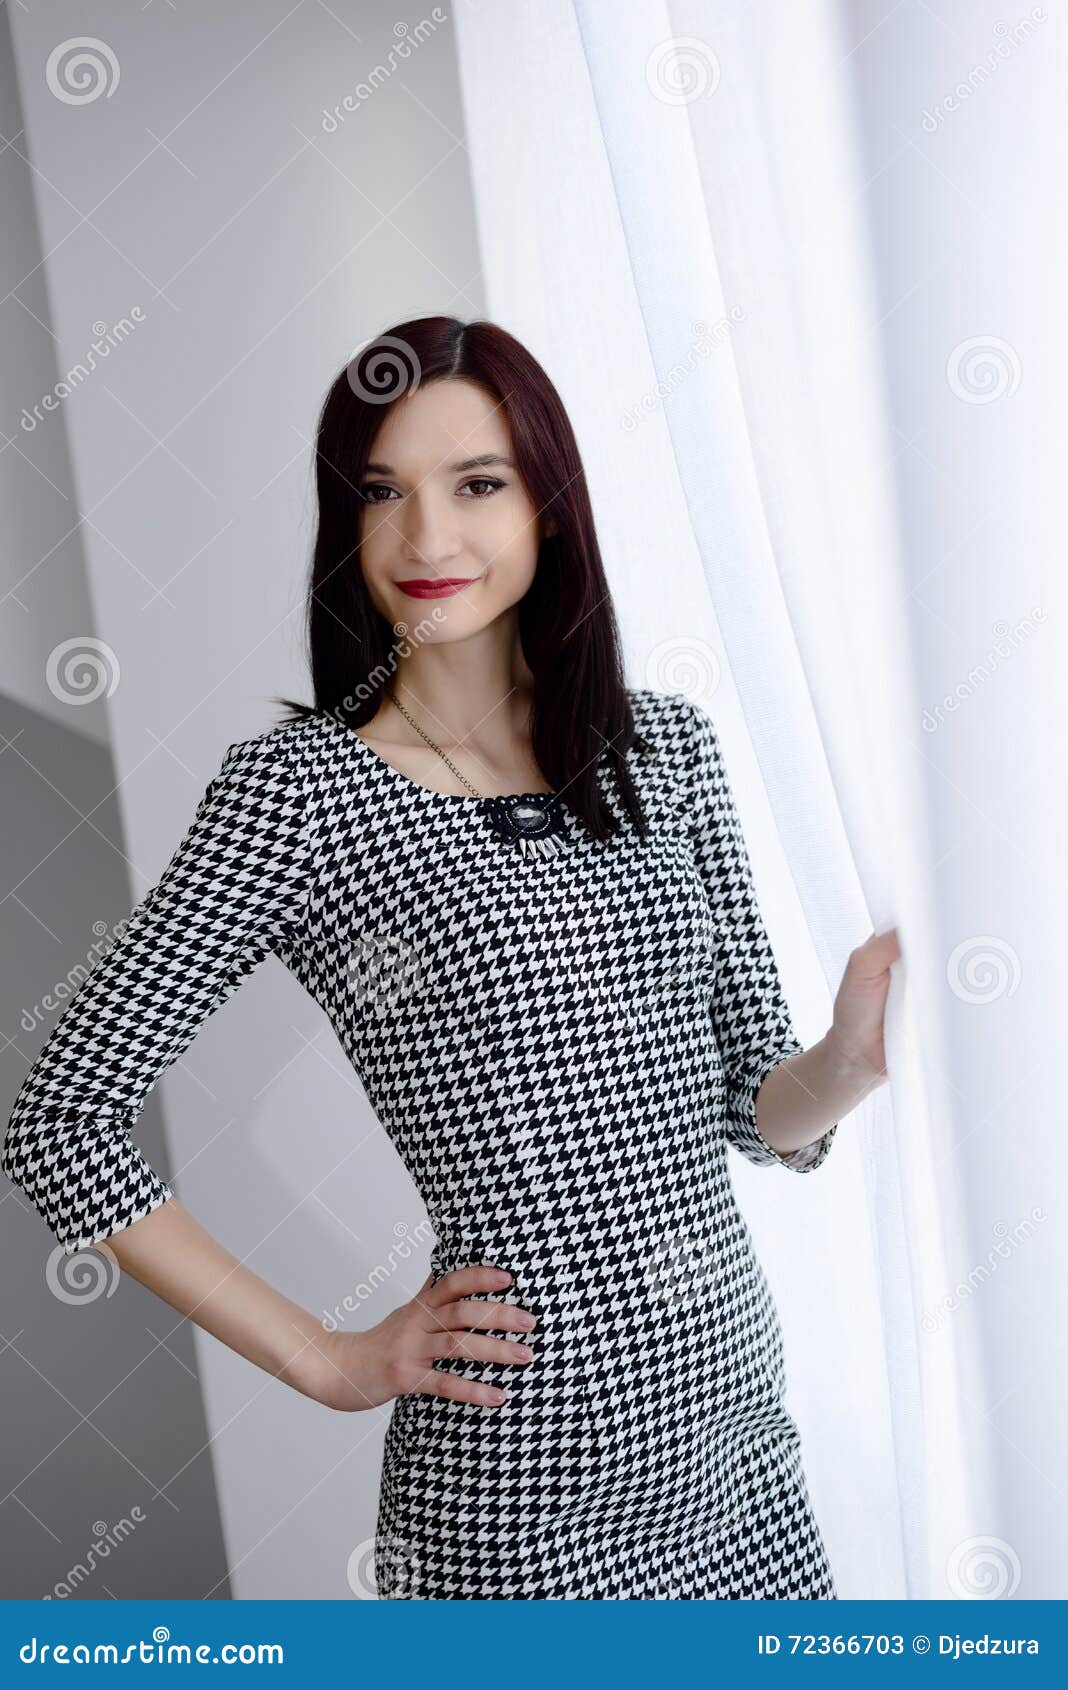 formally dressed young brunette woman